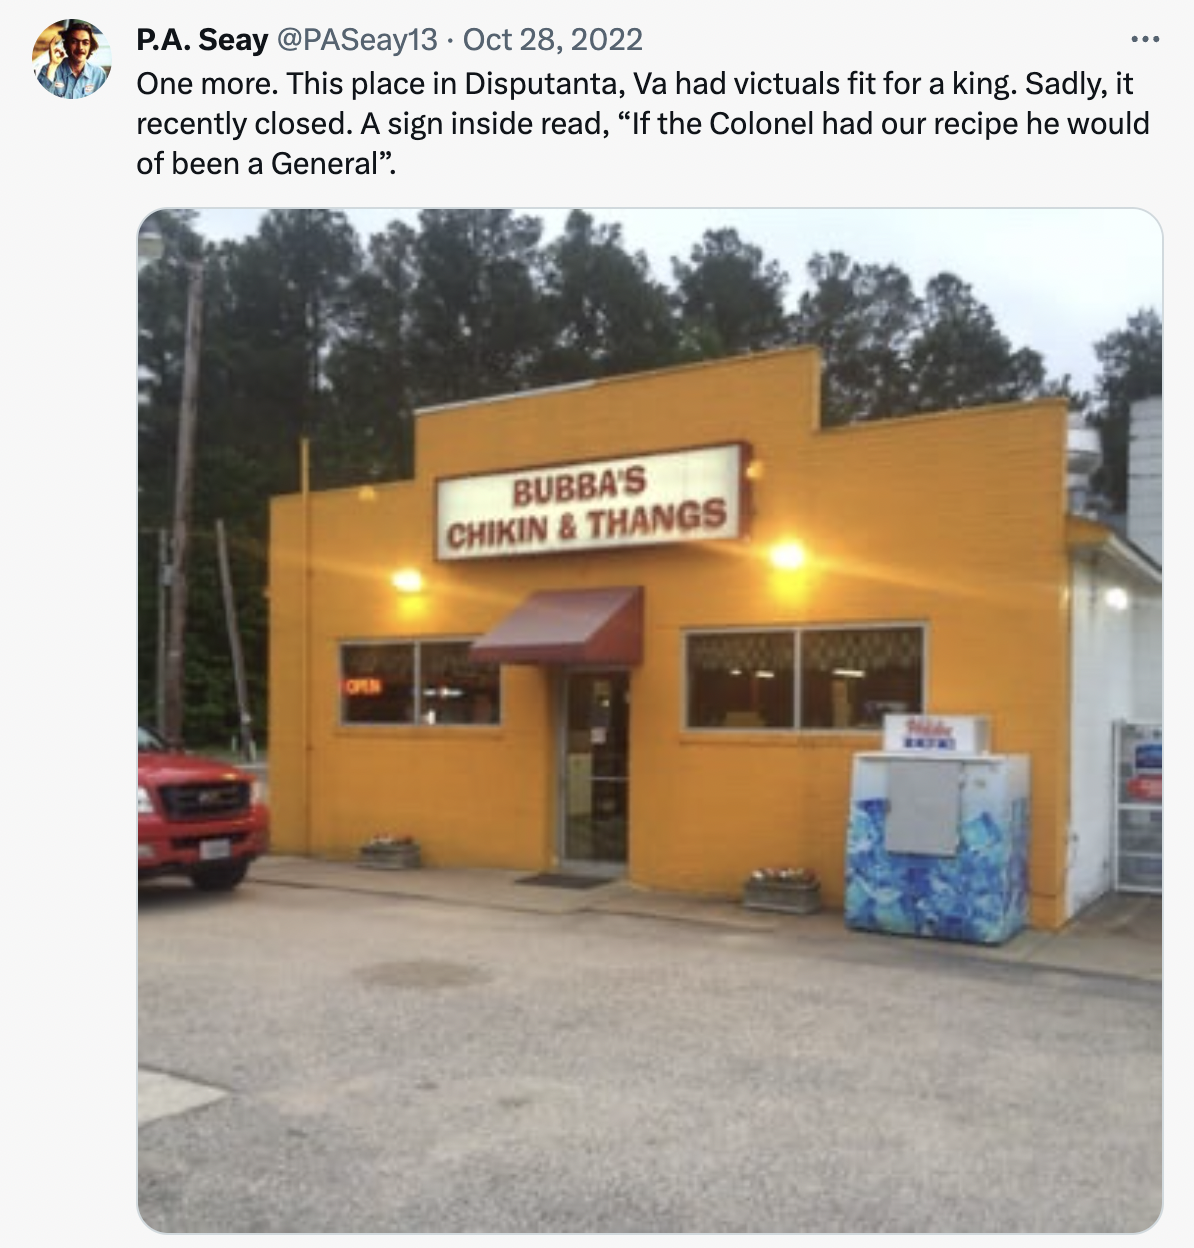 real estate -. This place in Disputanta, Va had victuals fit for a king. Sadly, it recently closed. A sign inside read, "If the Colonel had our recipe he would of been a General".